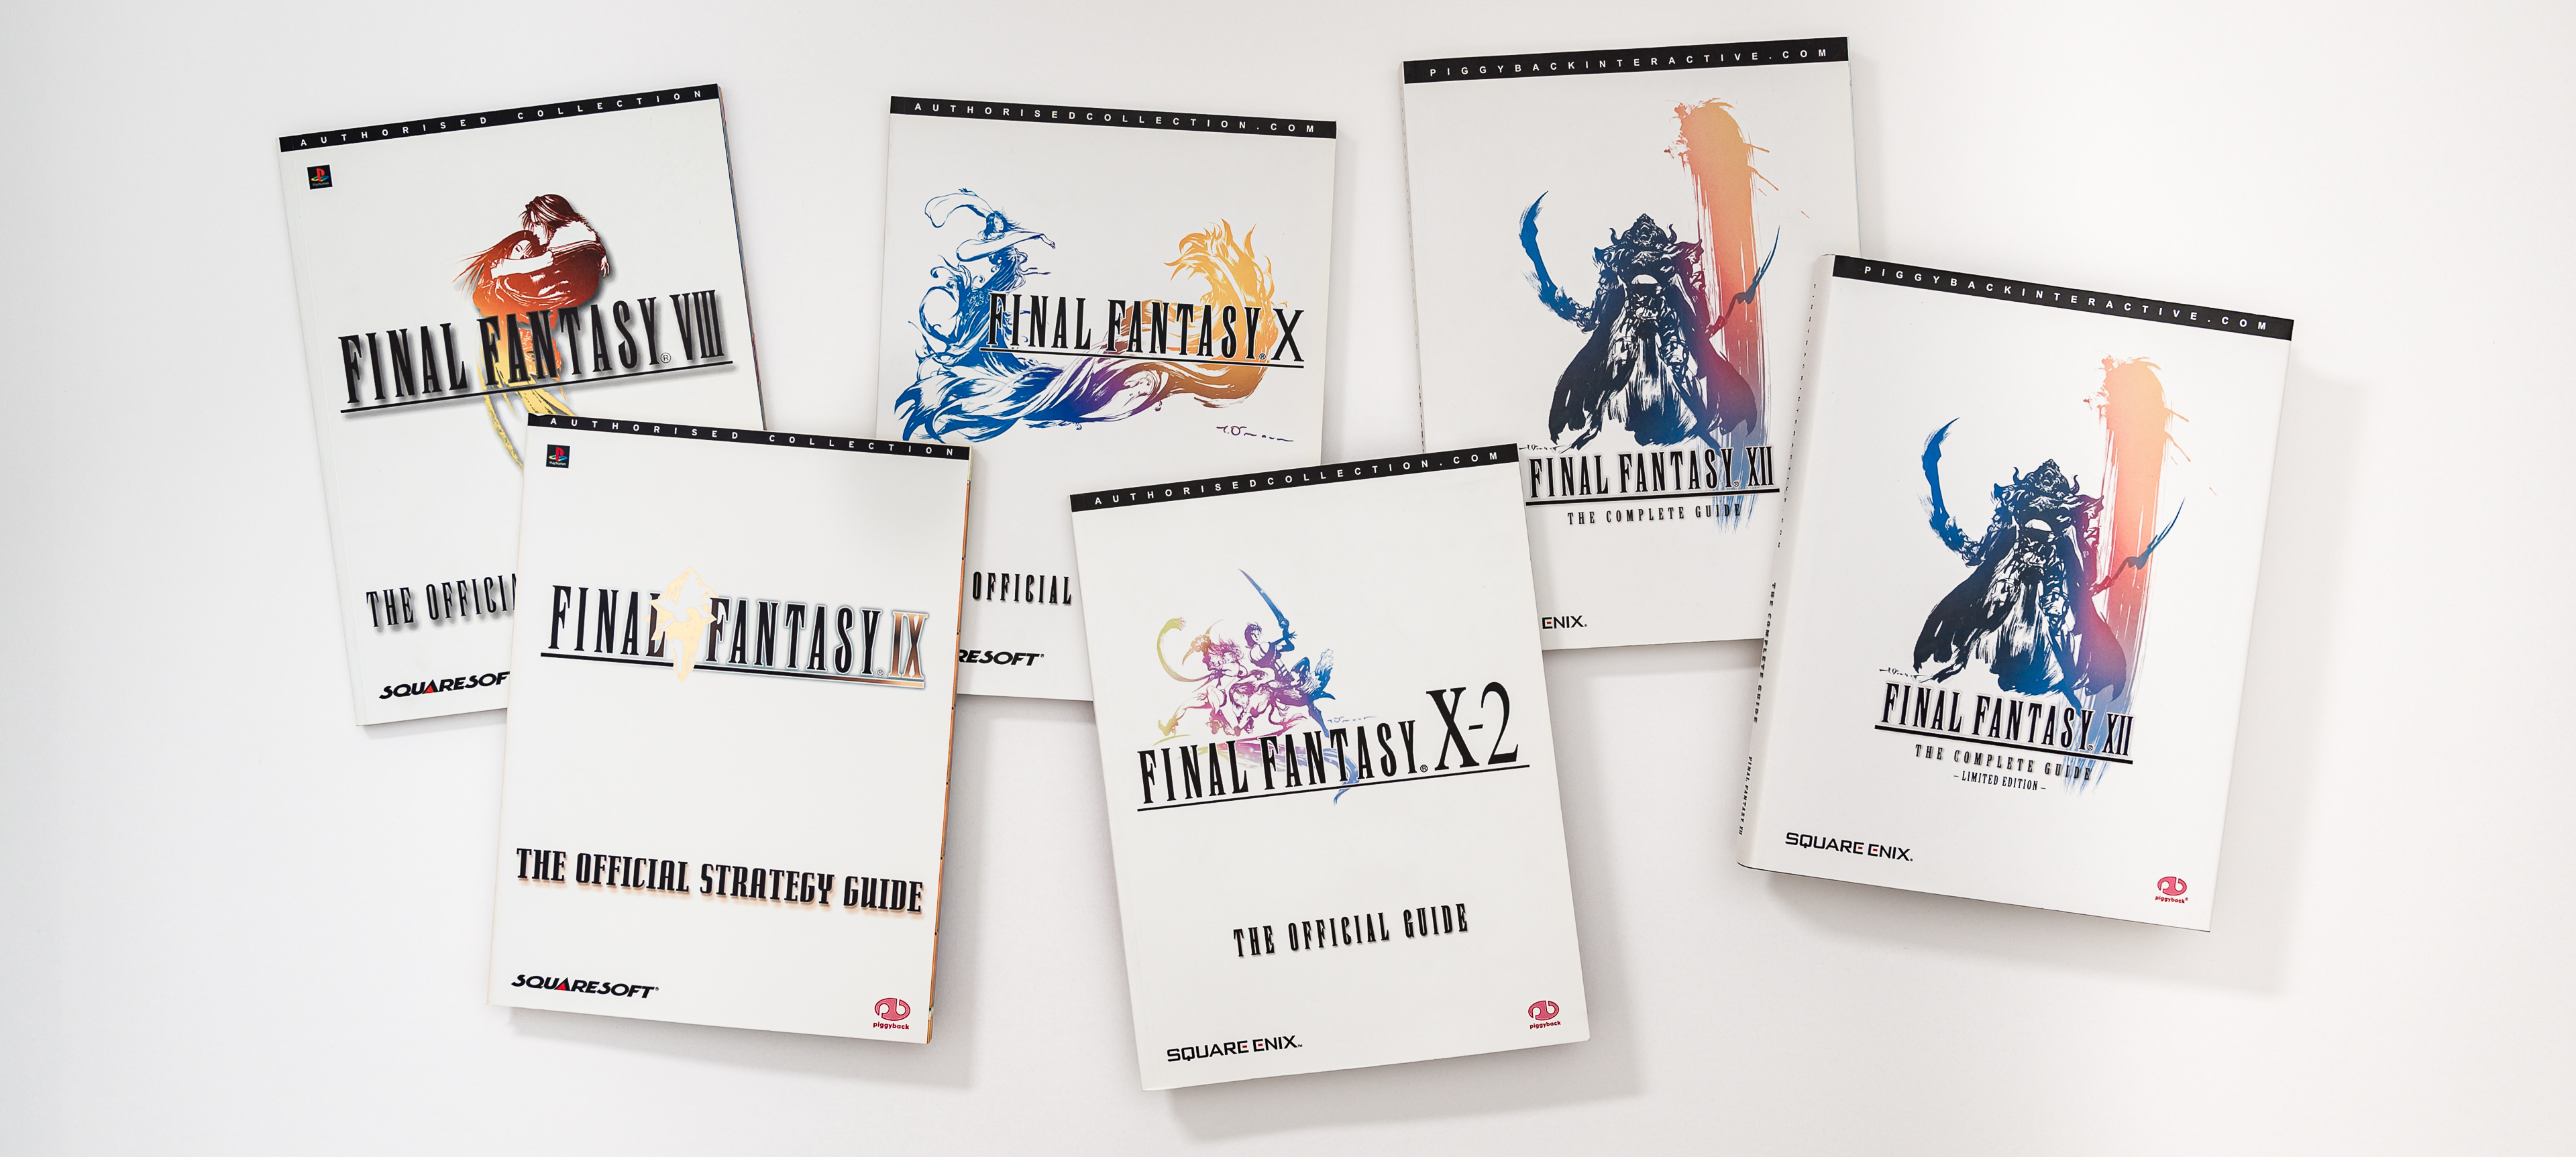 final fantasy viii official strategy guide